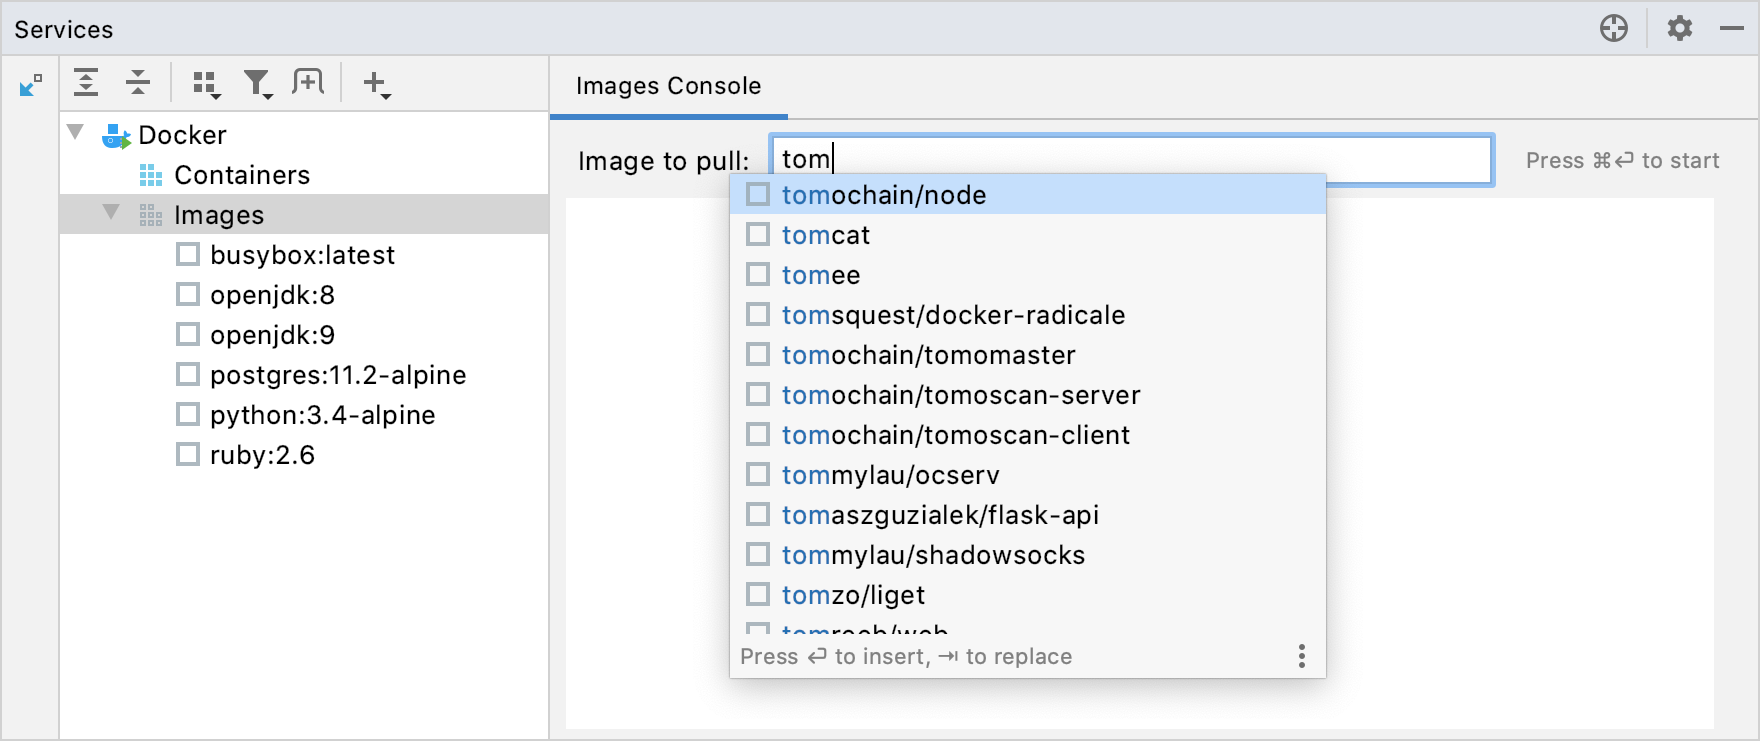 The Images Console